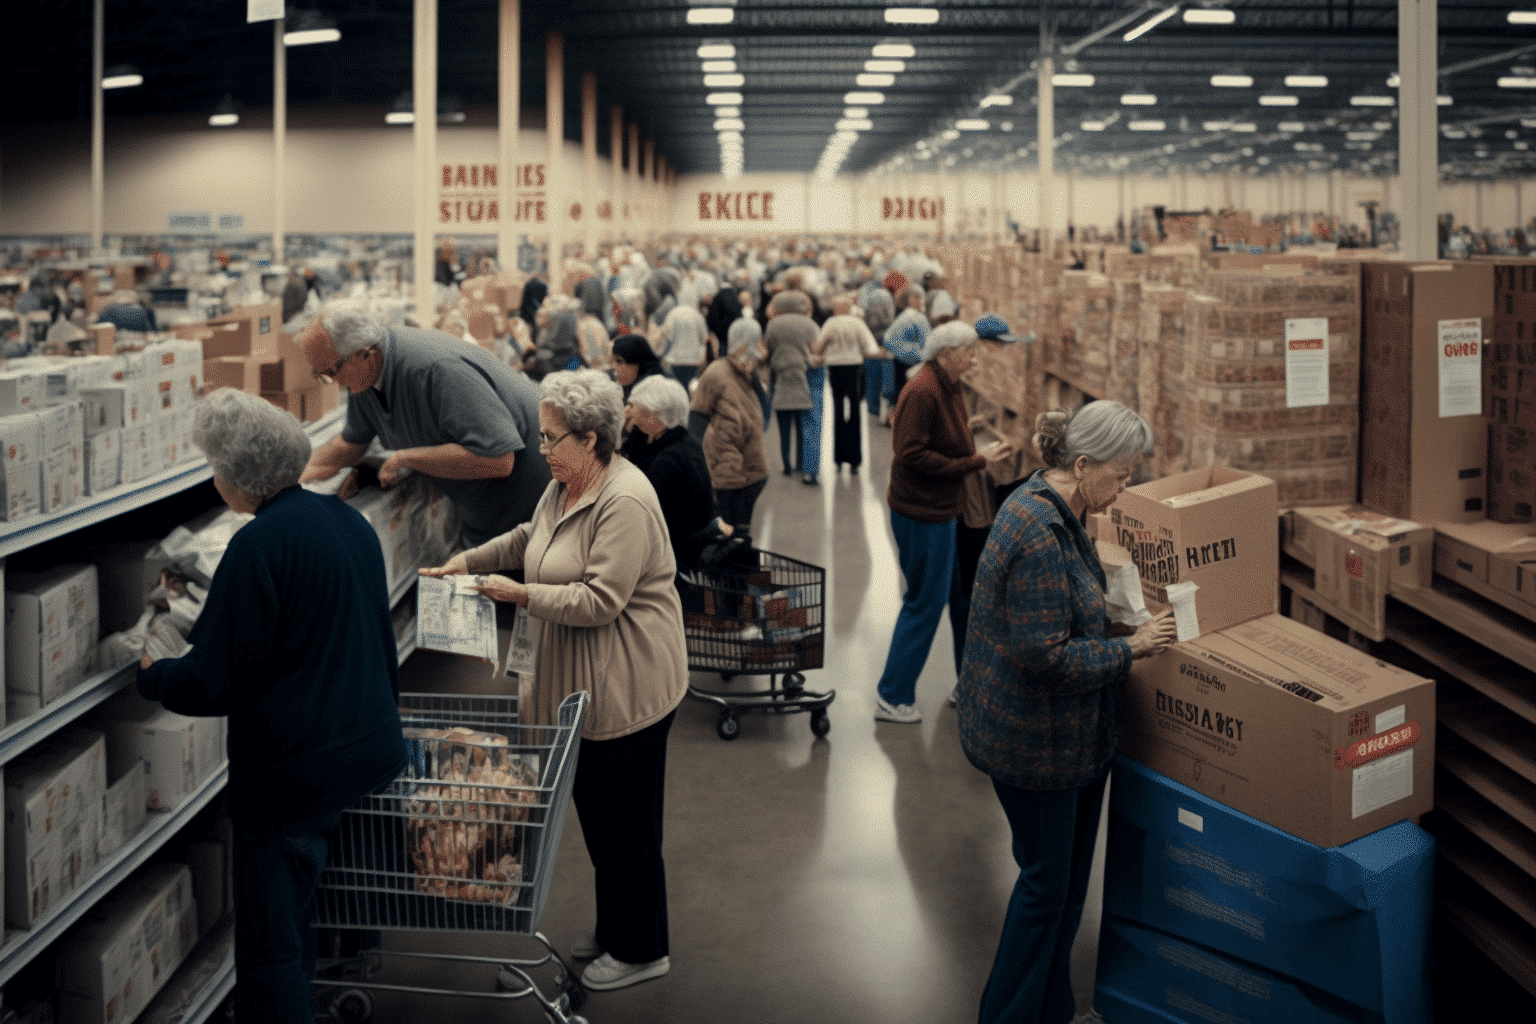 costco-shoppers-spend-more-than-expected-how-to-save-money-on-your-trips